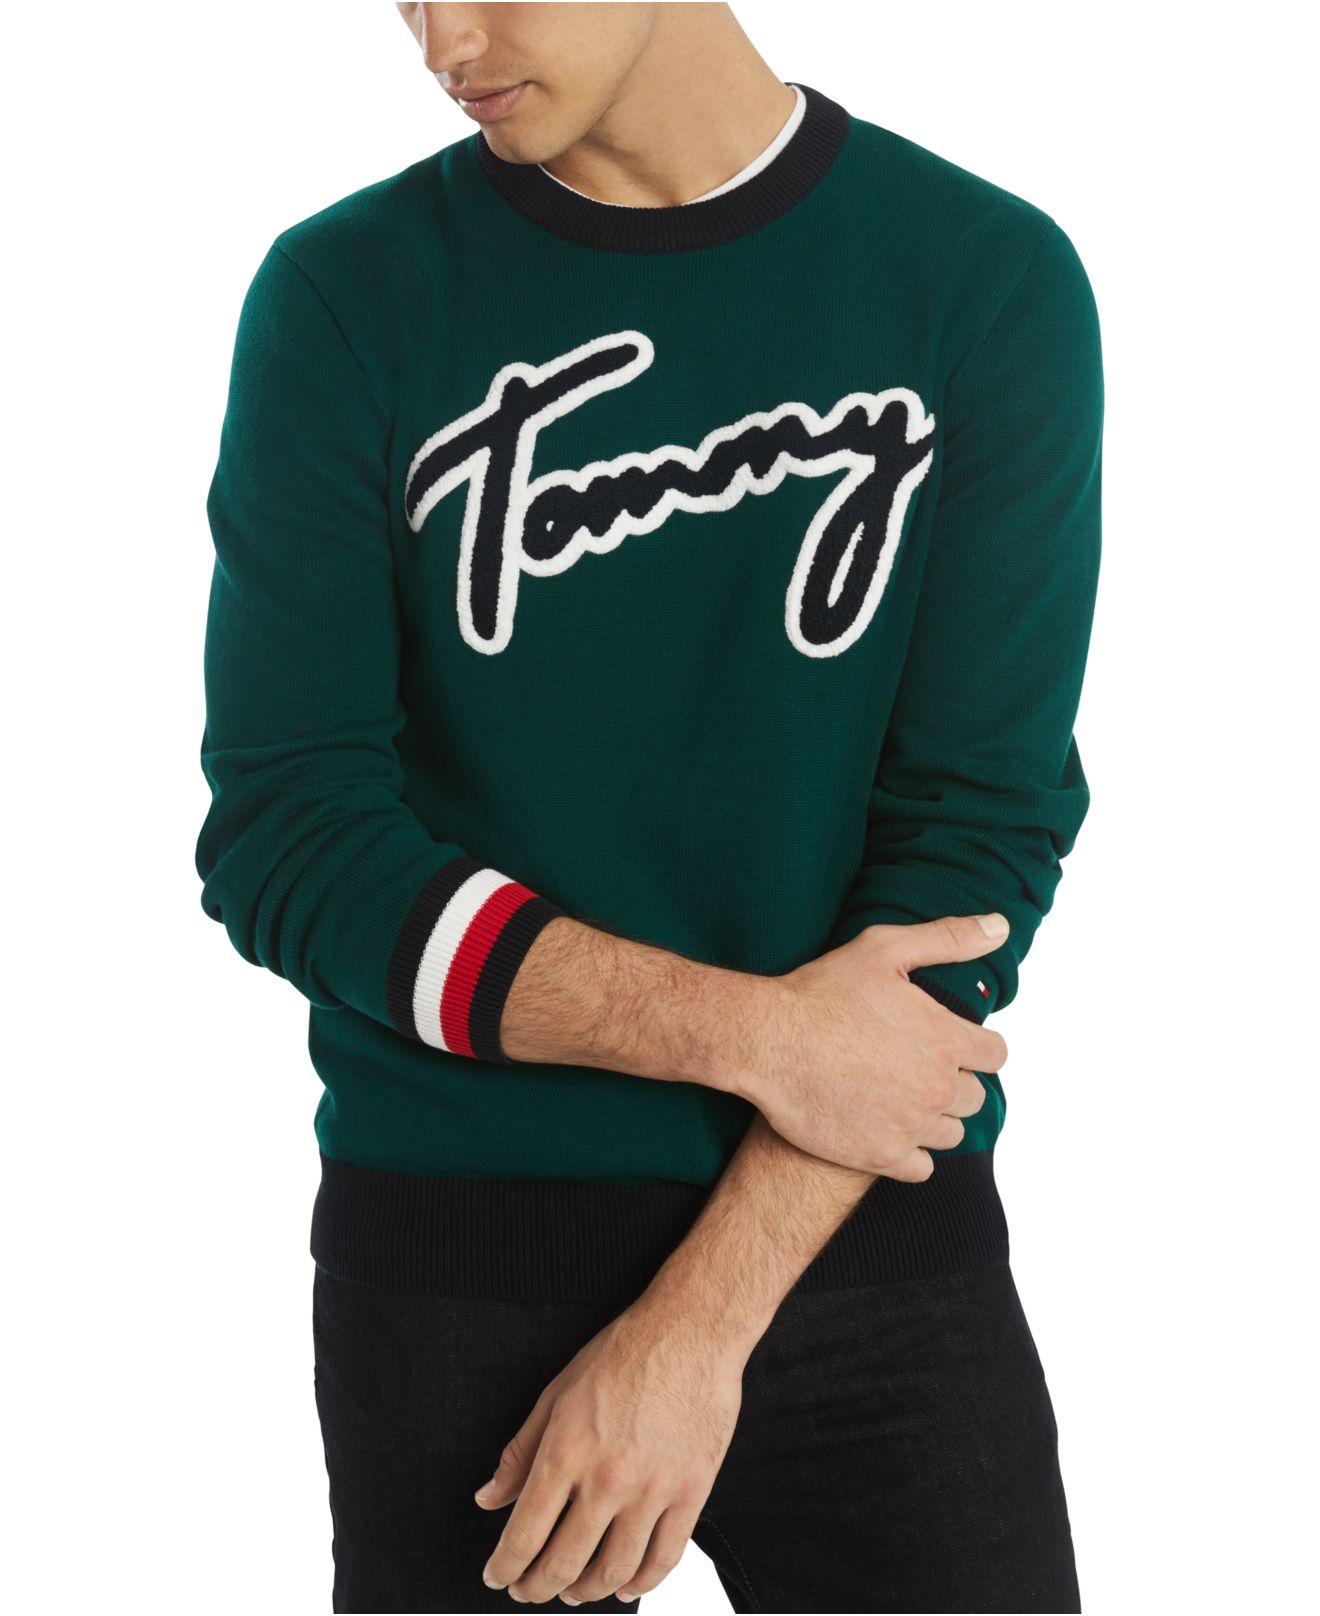 Buy > sweater tommy jeans > in stock